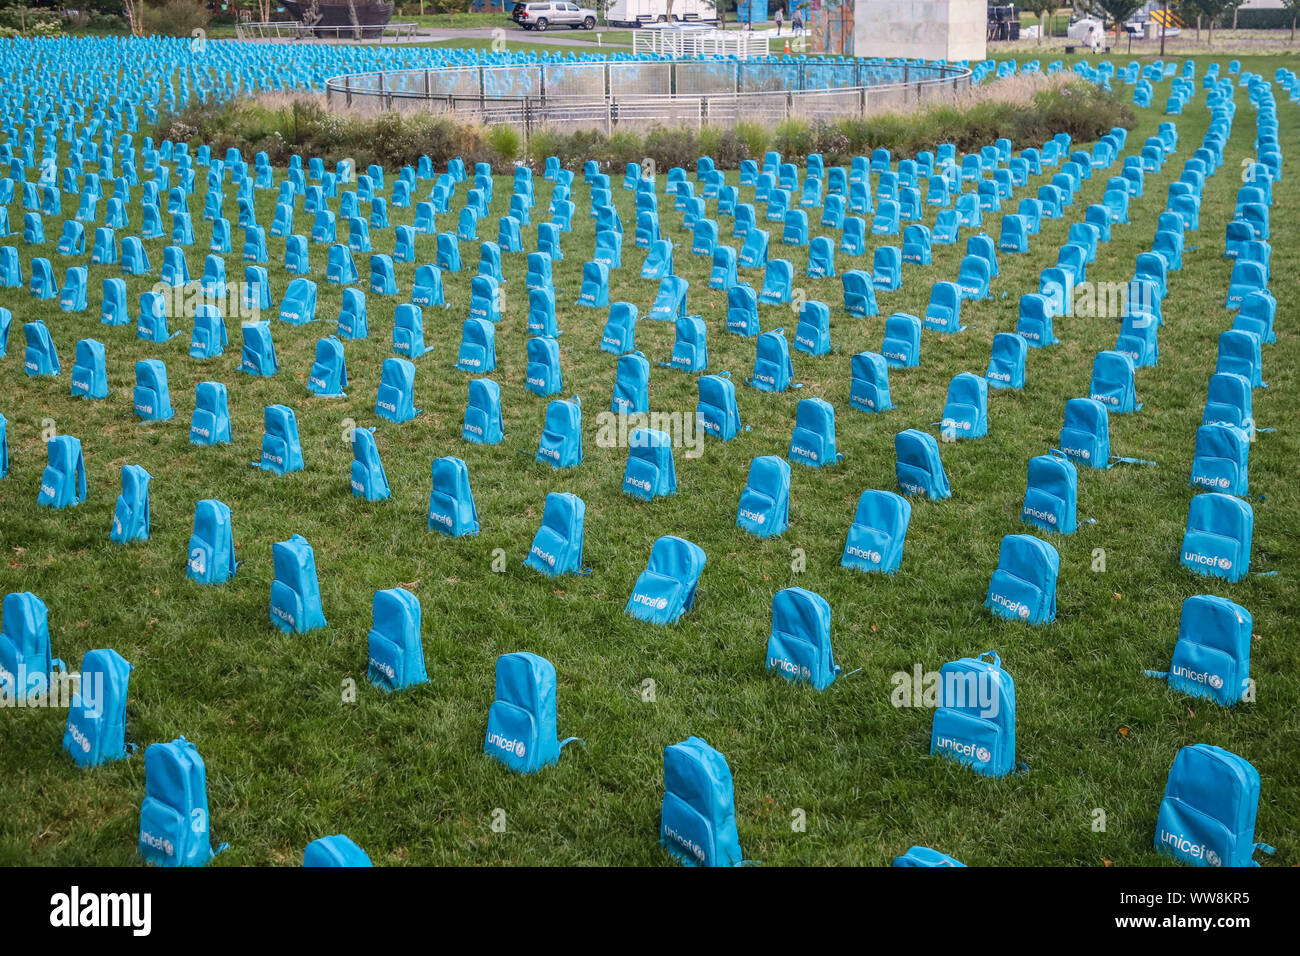 New York, New York, USA. 13th Sep, 2019. UNICEF Intervention at UN  Headquarters in New York - View of 3,758 UNICEF-mounted school bags as a  facility at UN Headquarters to resemble headstones